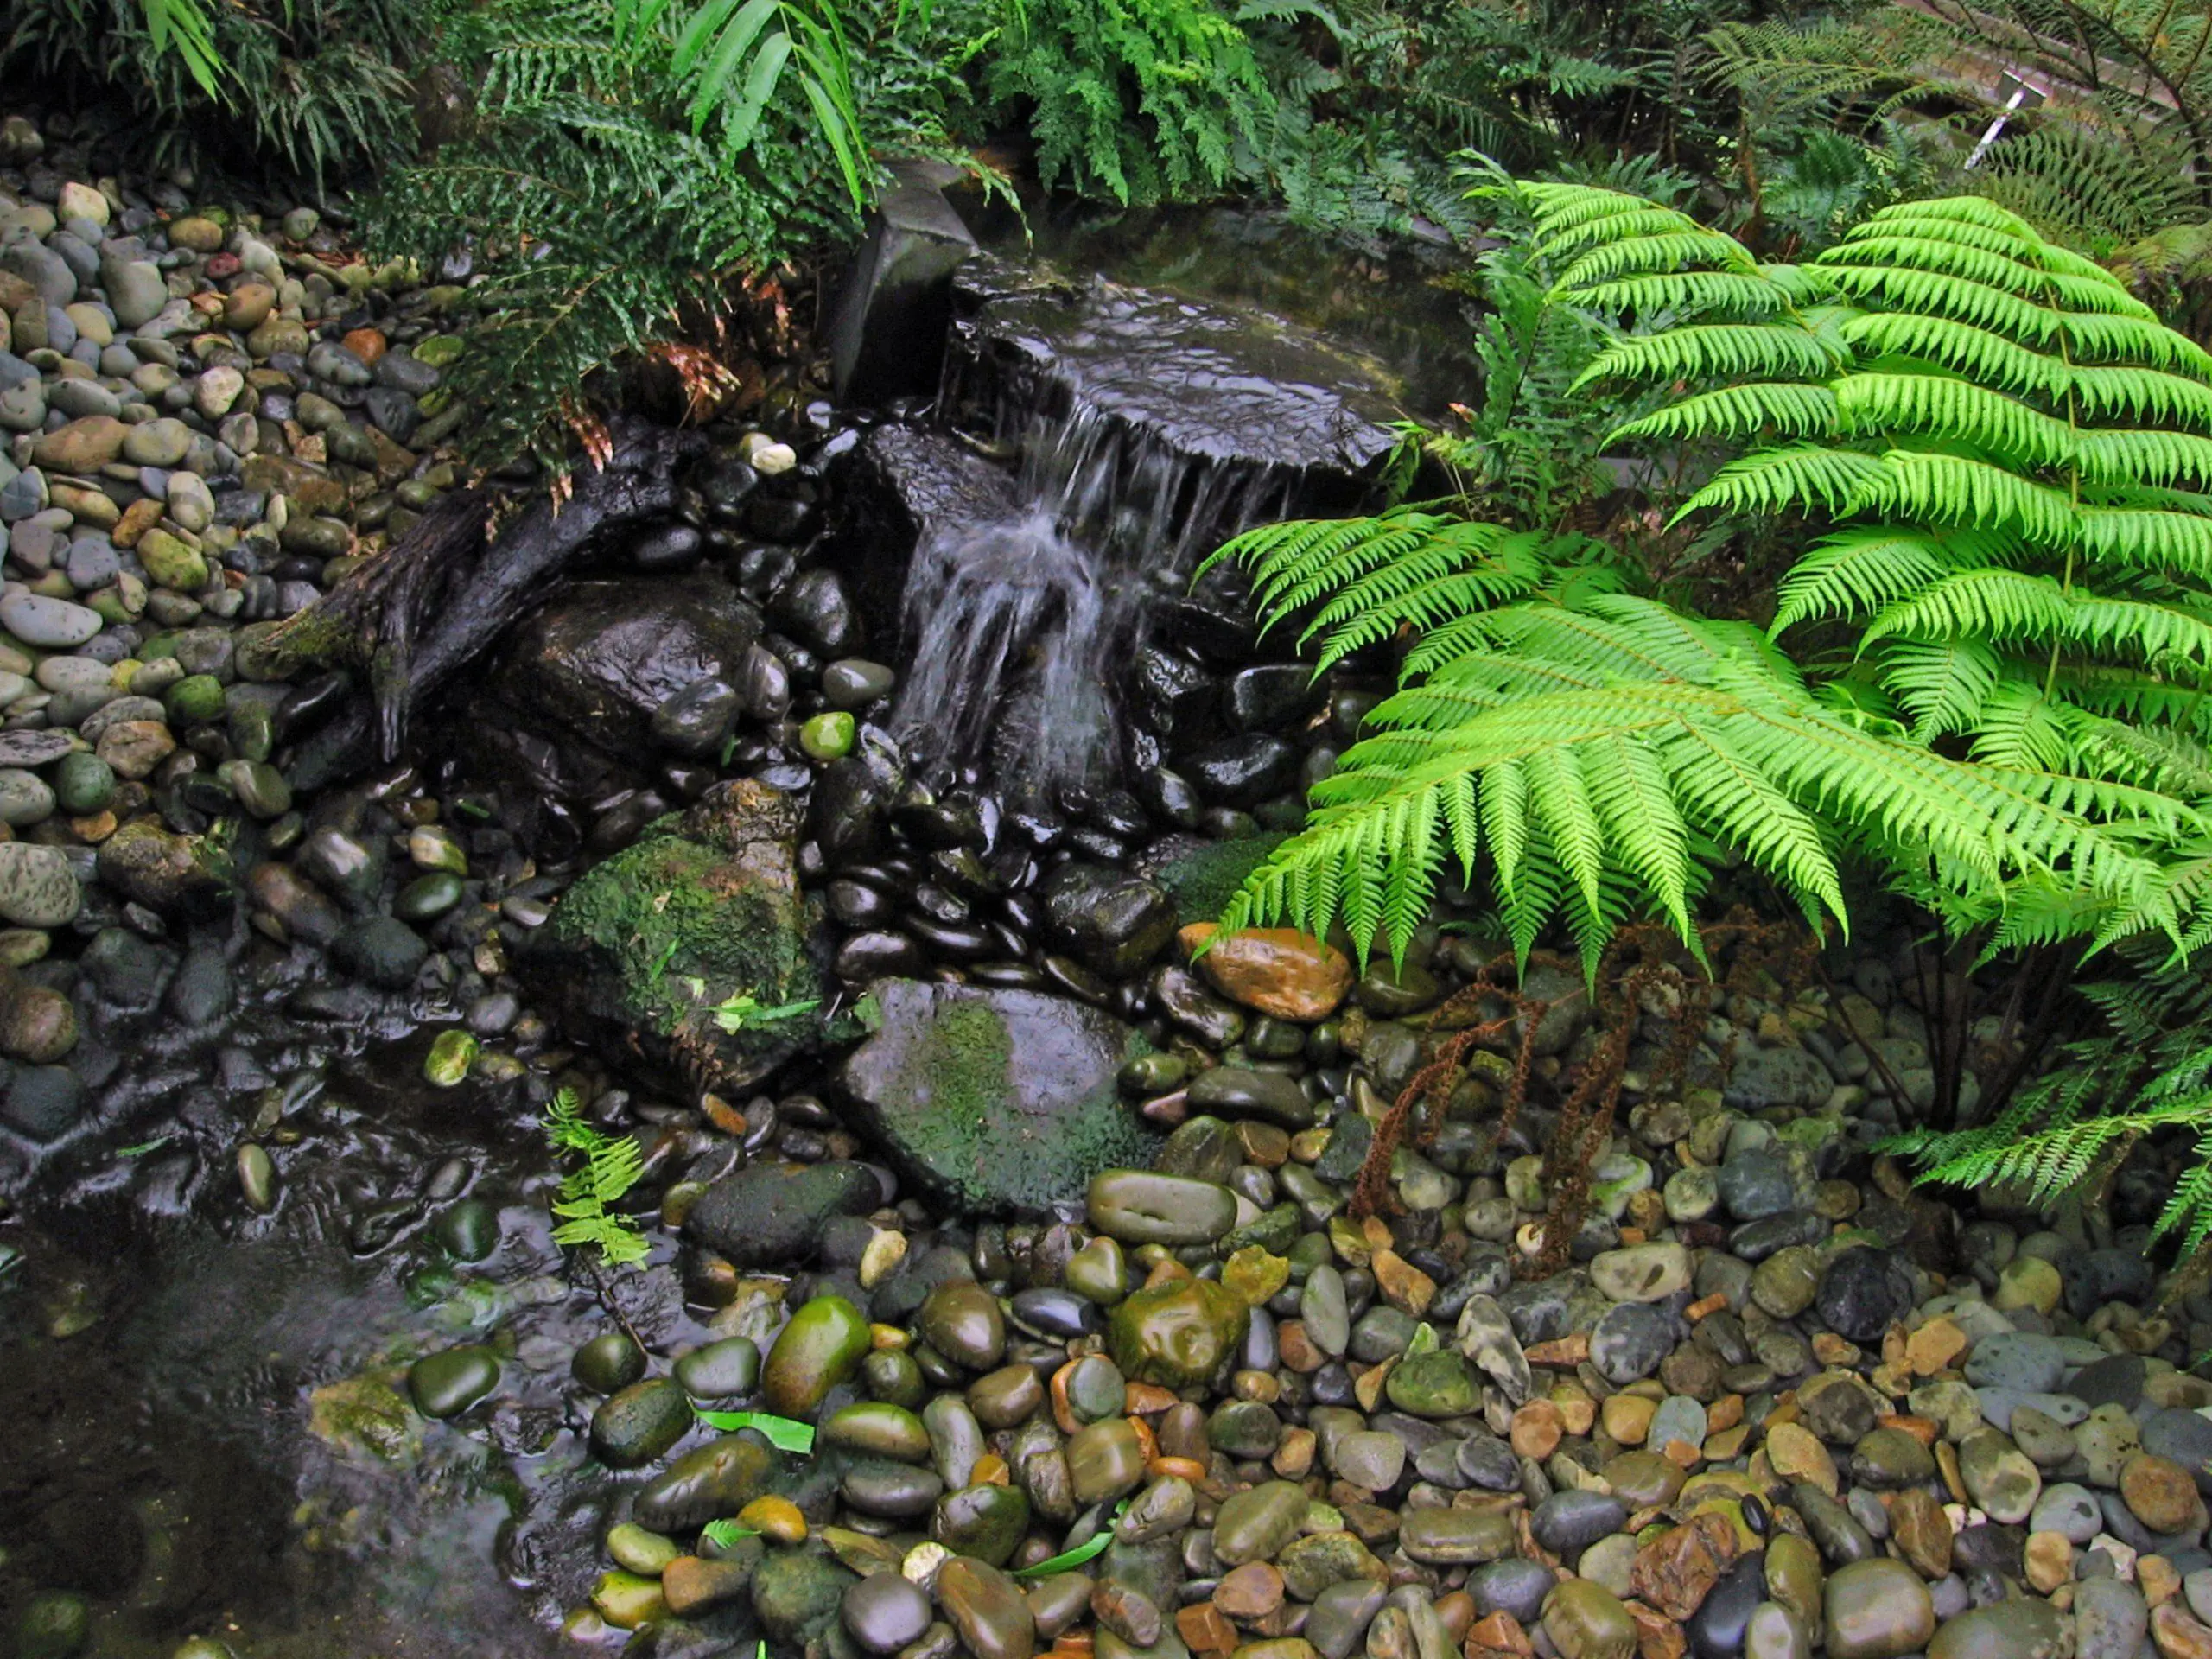 Ferns close to water which allows for easy reproductive spread